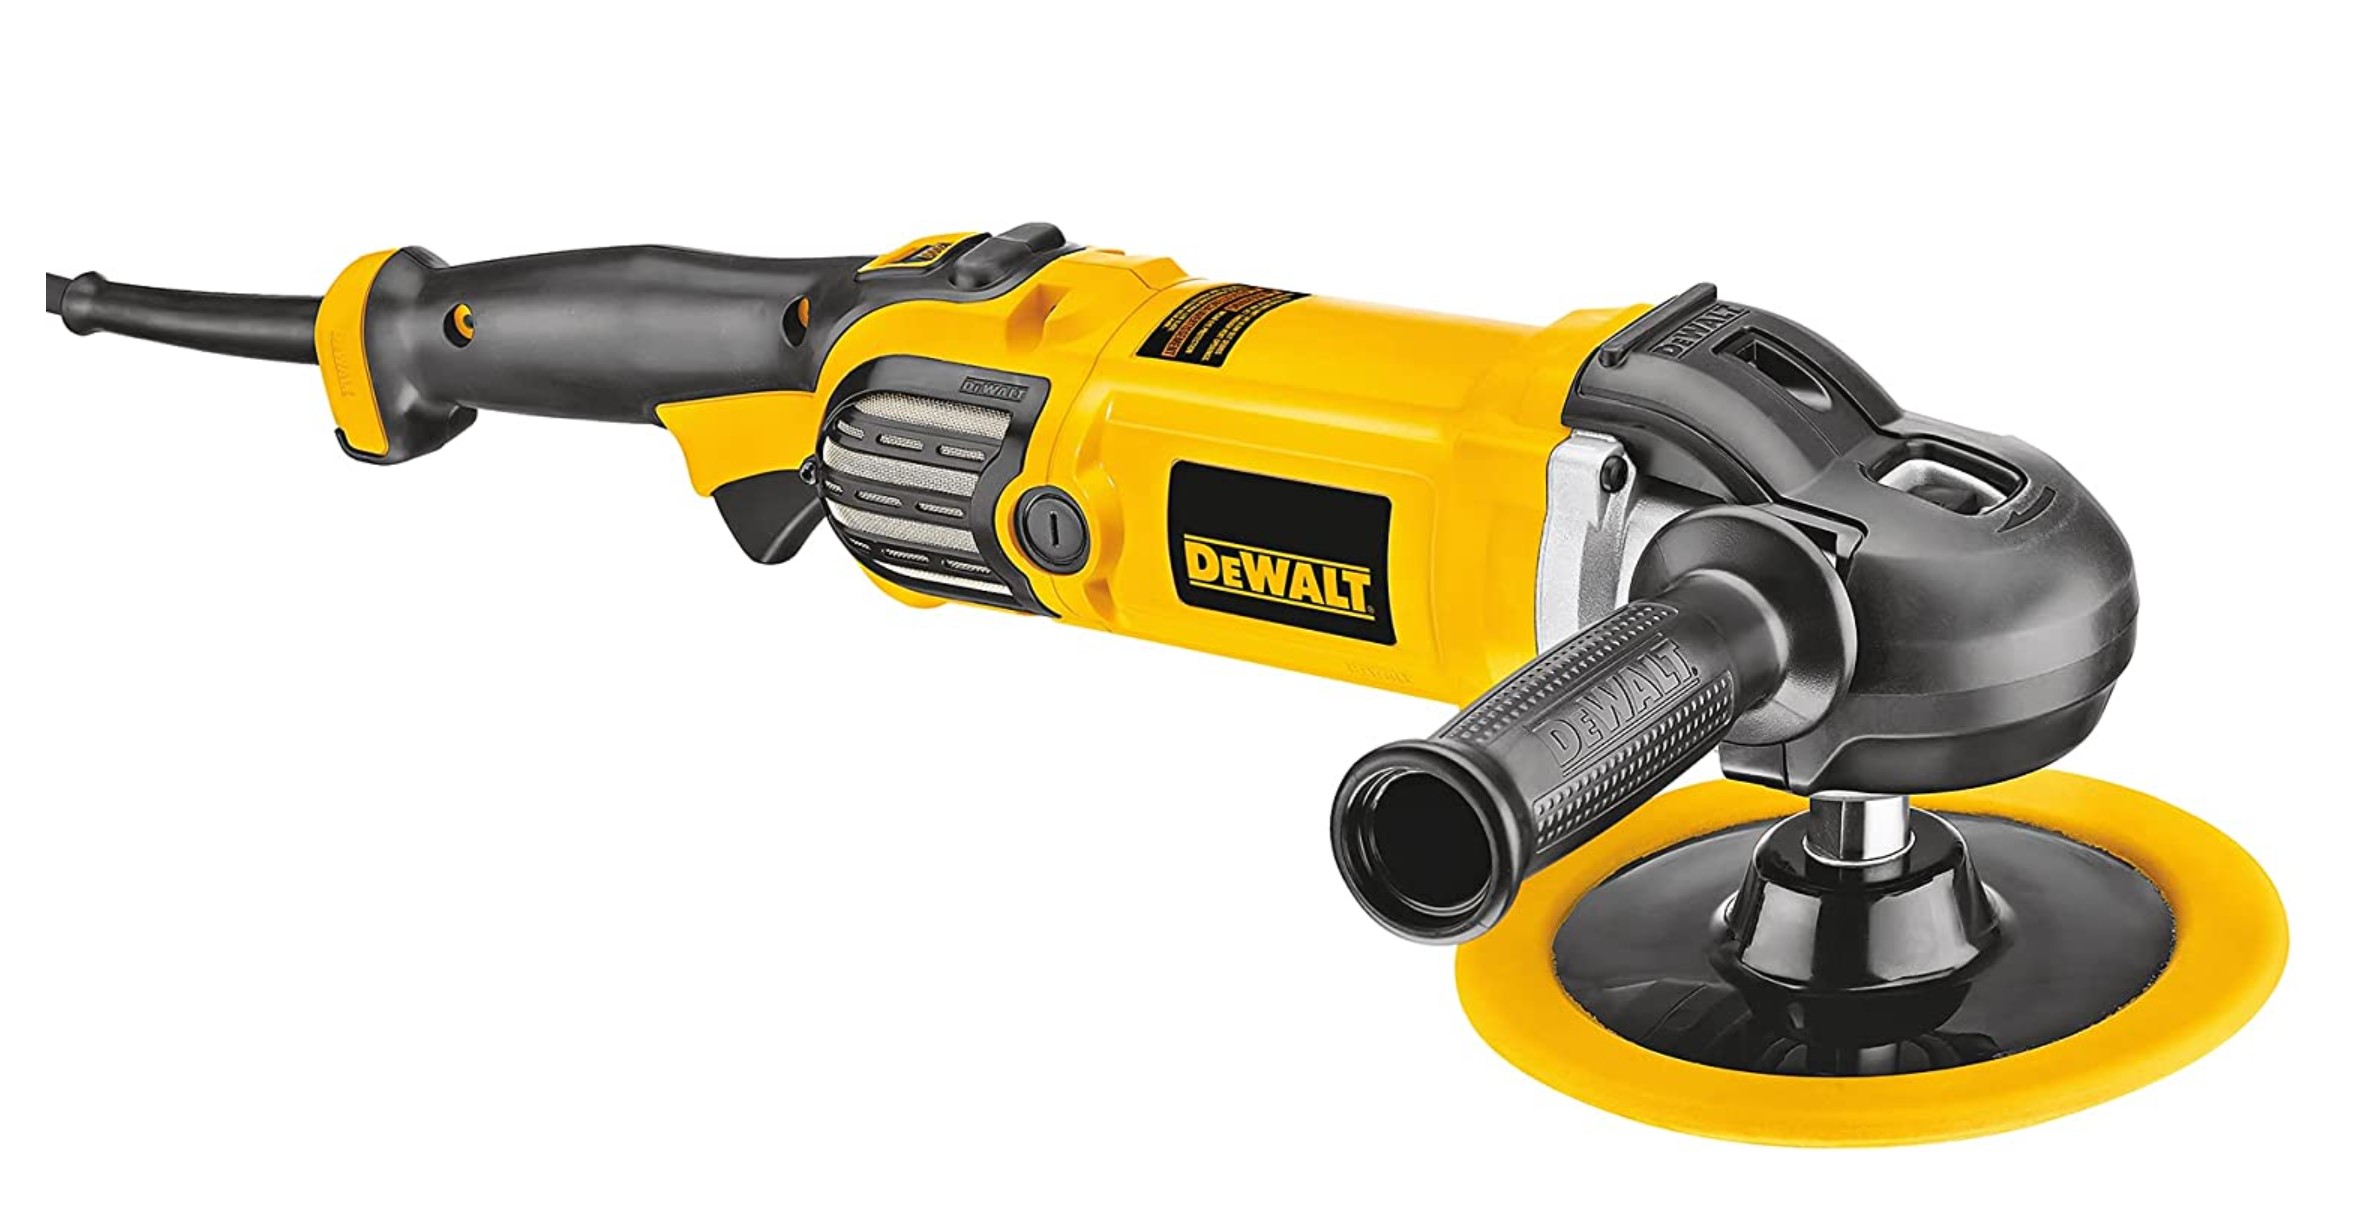 DEWALT 7' / 9' FULLY FEATURED VARIABLE SPEED POLISHER